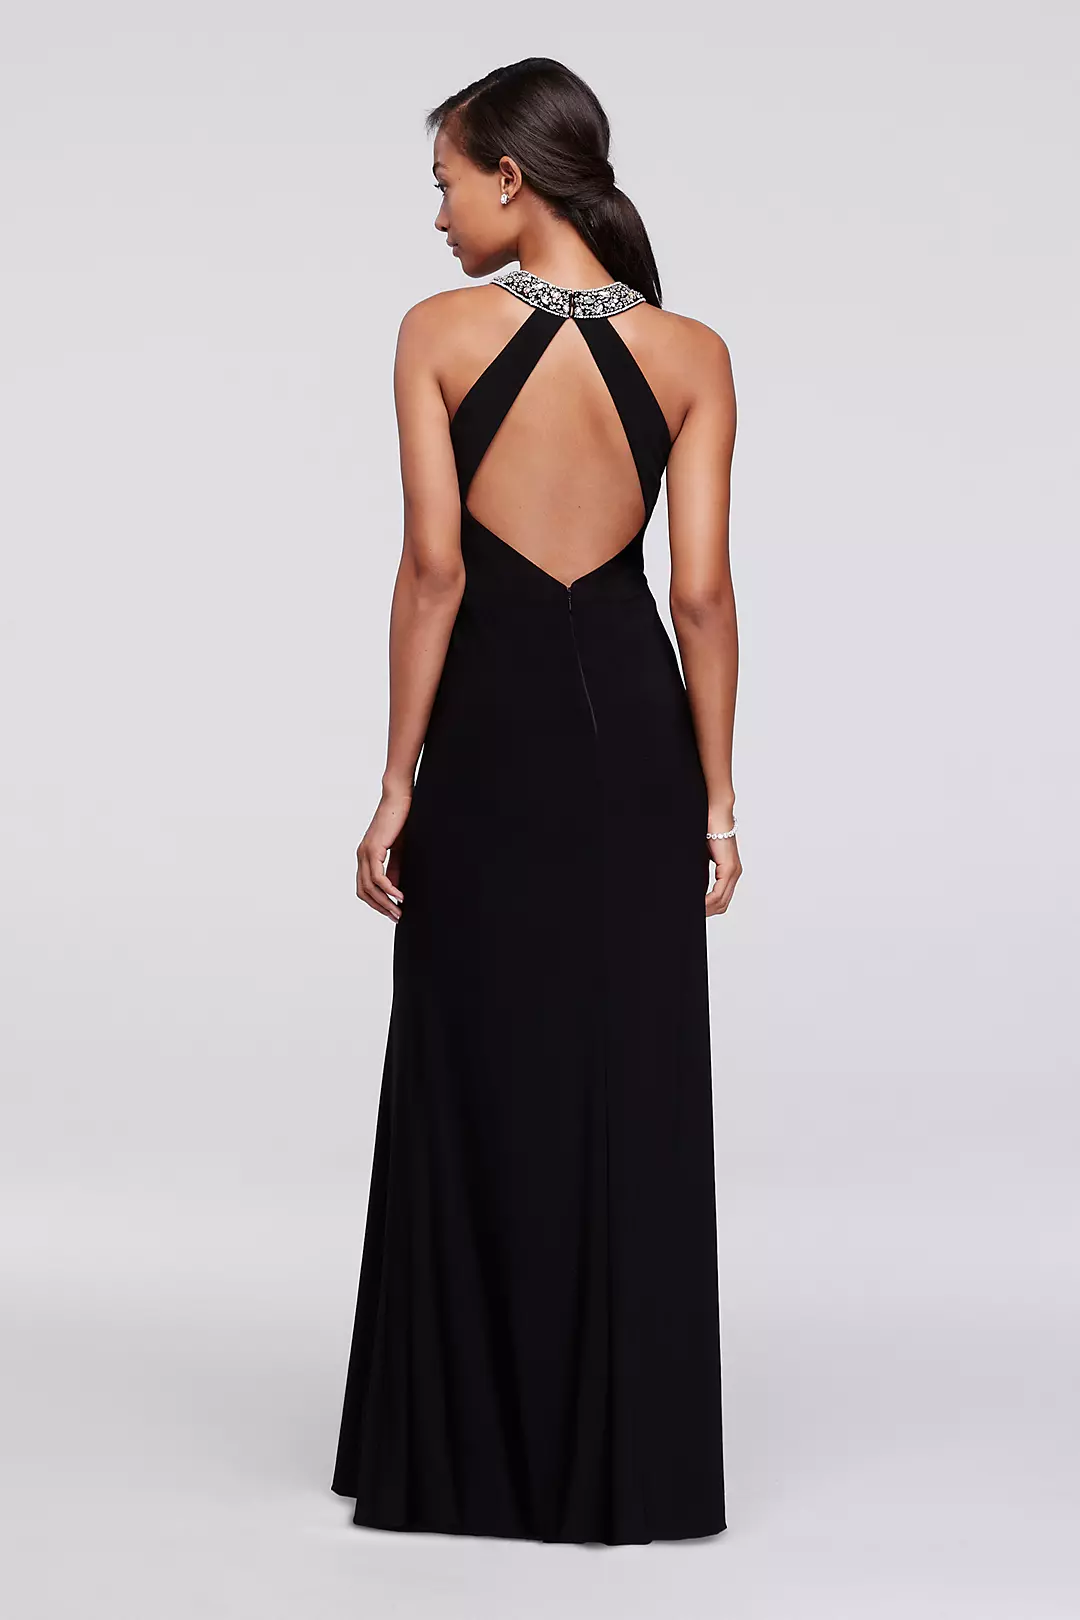 Beaded High Neck Prom Dress with Illusion Cutouts